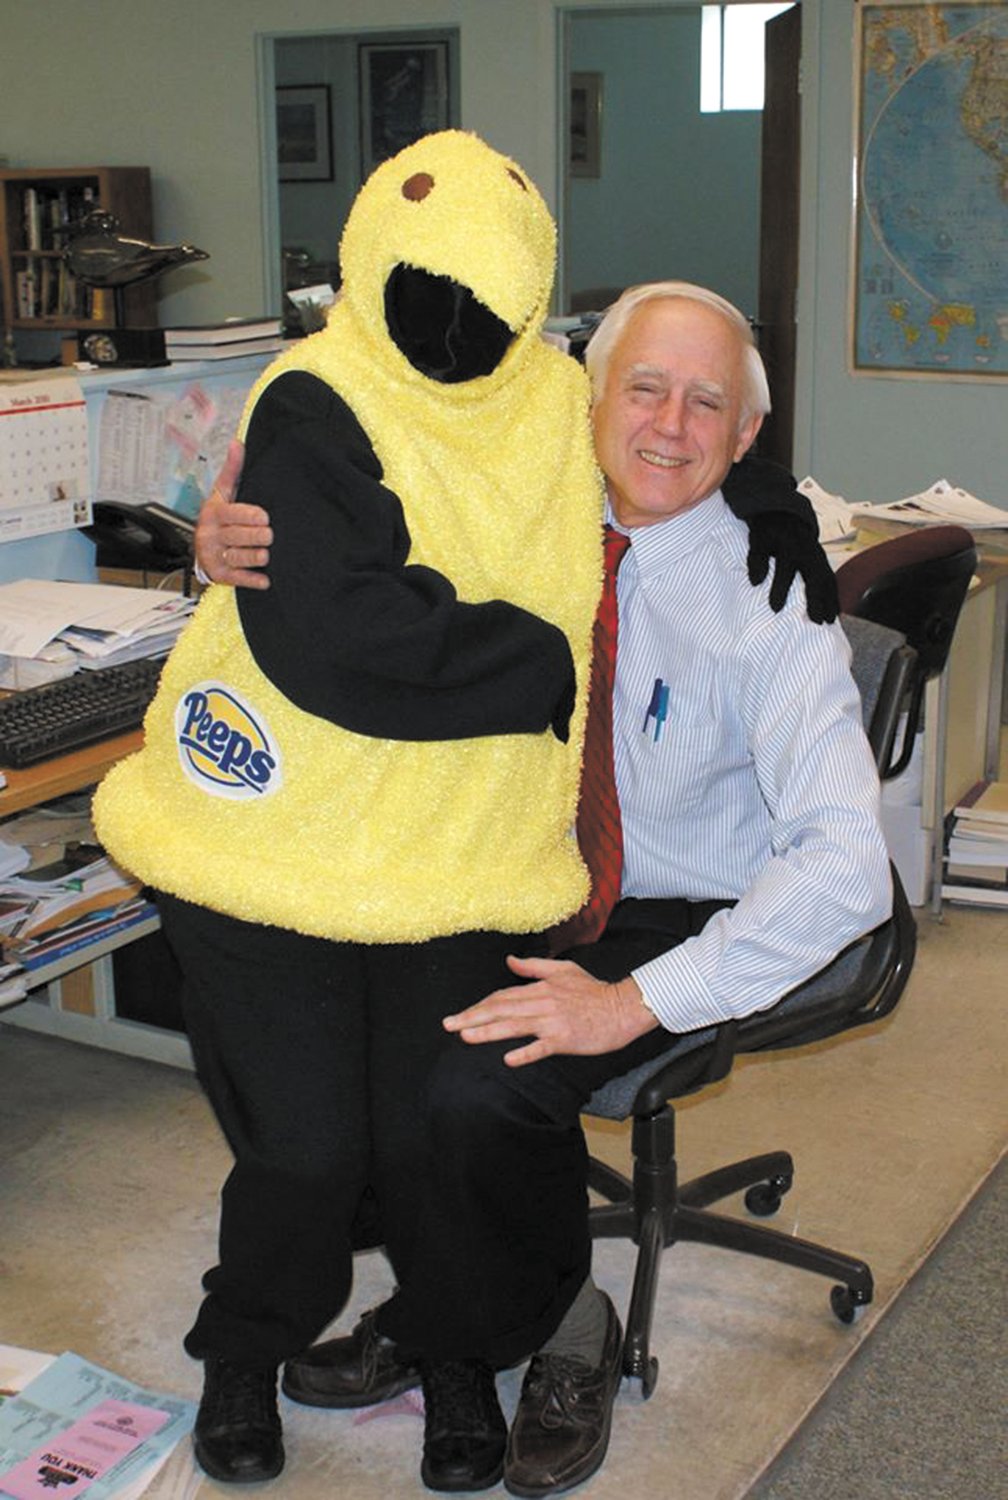 AND THEN SHE DRESSED AS A PEEP: After launching her “Peeps Show” with a giant-sized hand held Peeps, Meri notched it up with a Peeps outfit which she wore into the Beacon-Herald office. Here she shows it off to publisher John Howell.